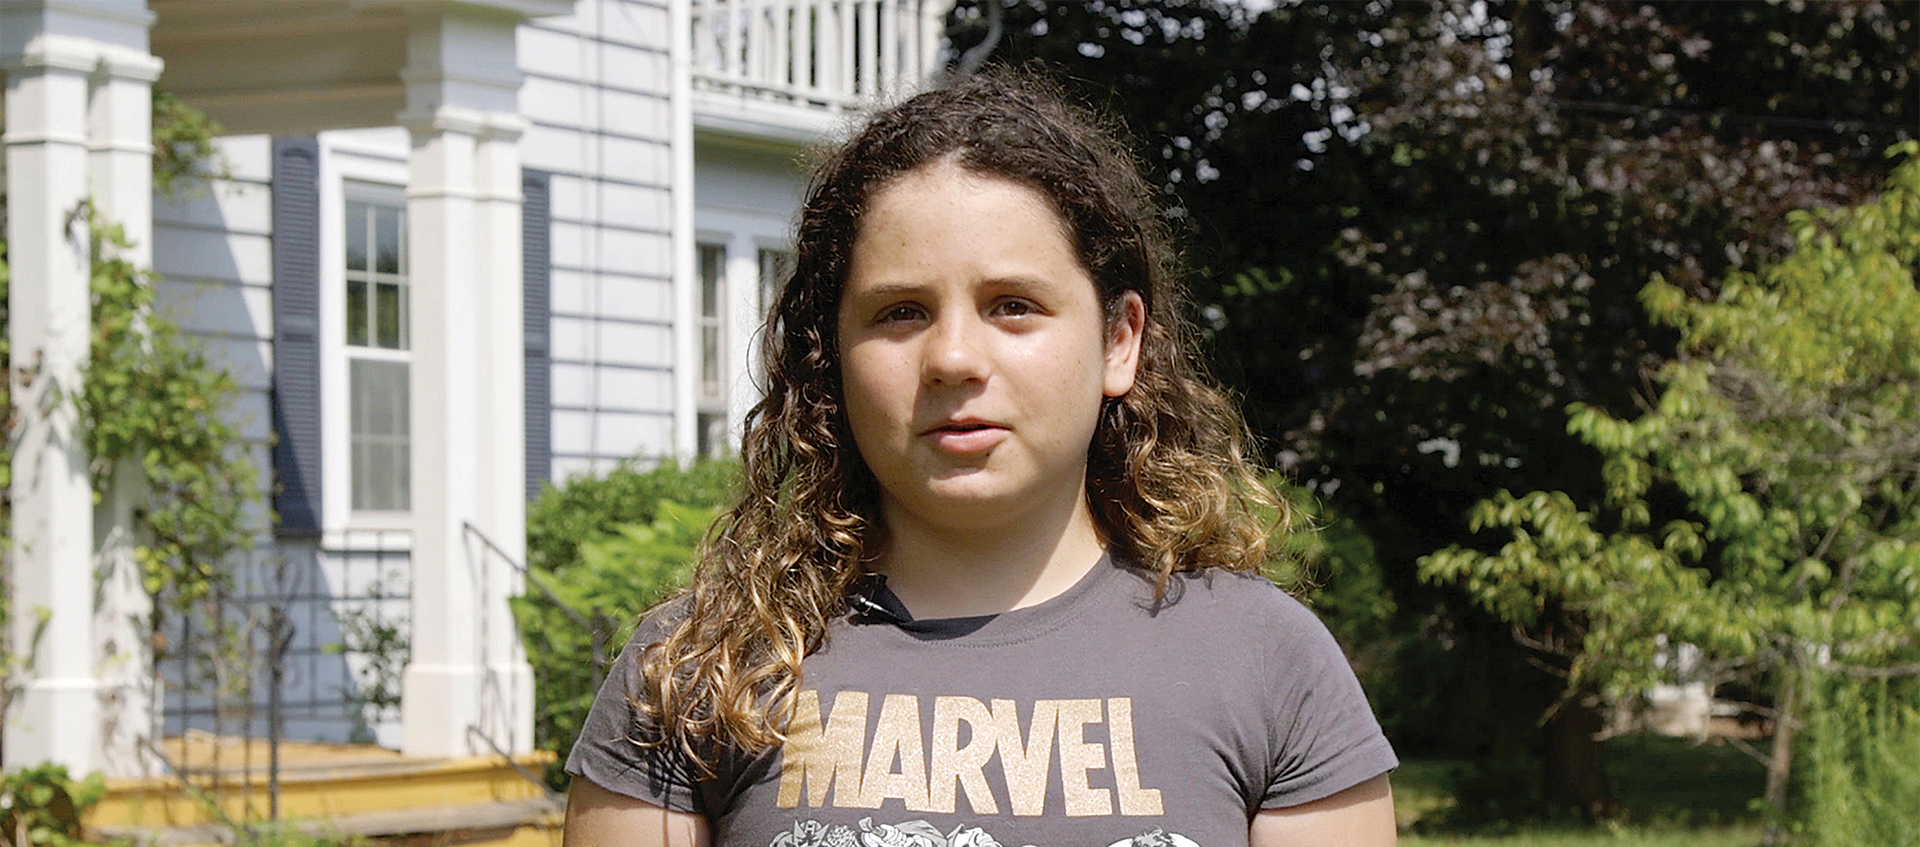 A girl in a Marvel T-shirt stands in front of a home